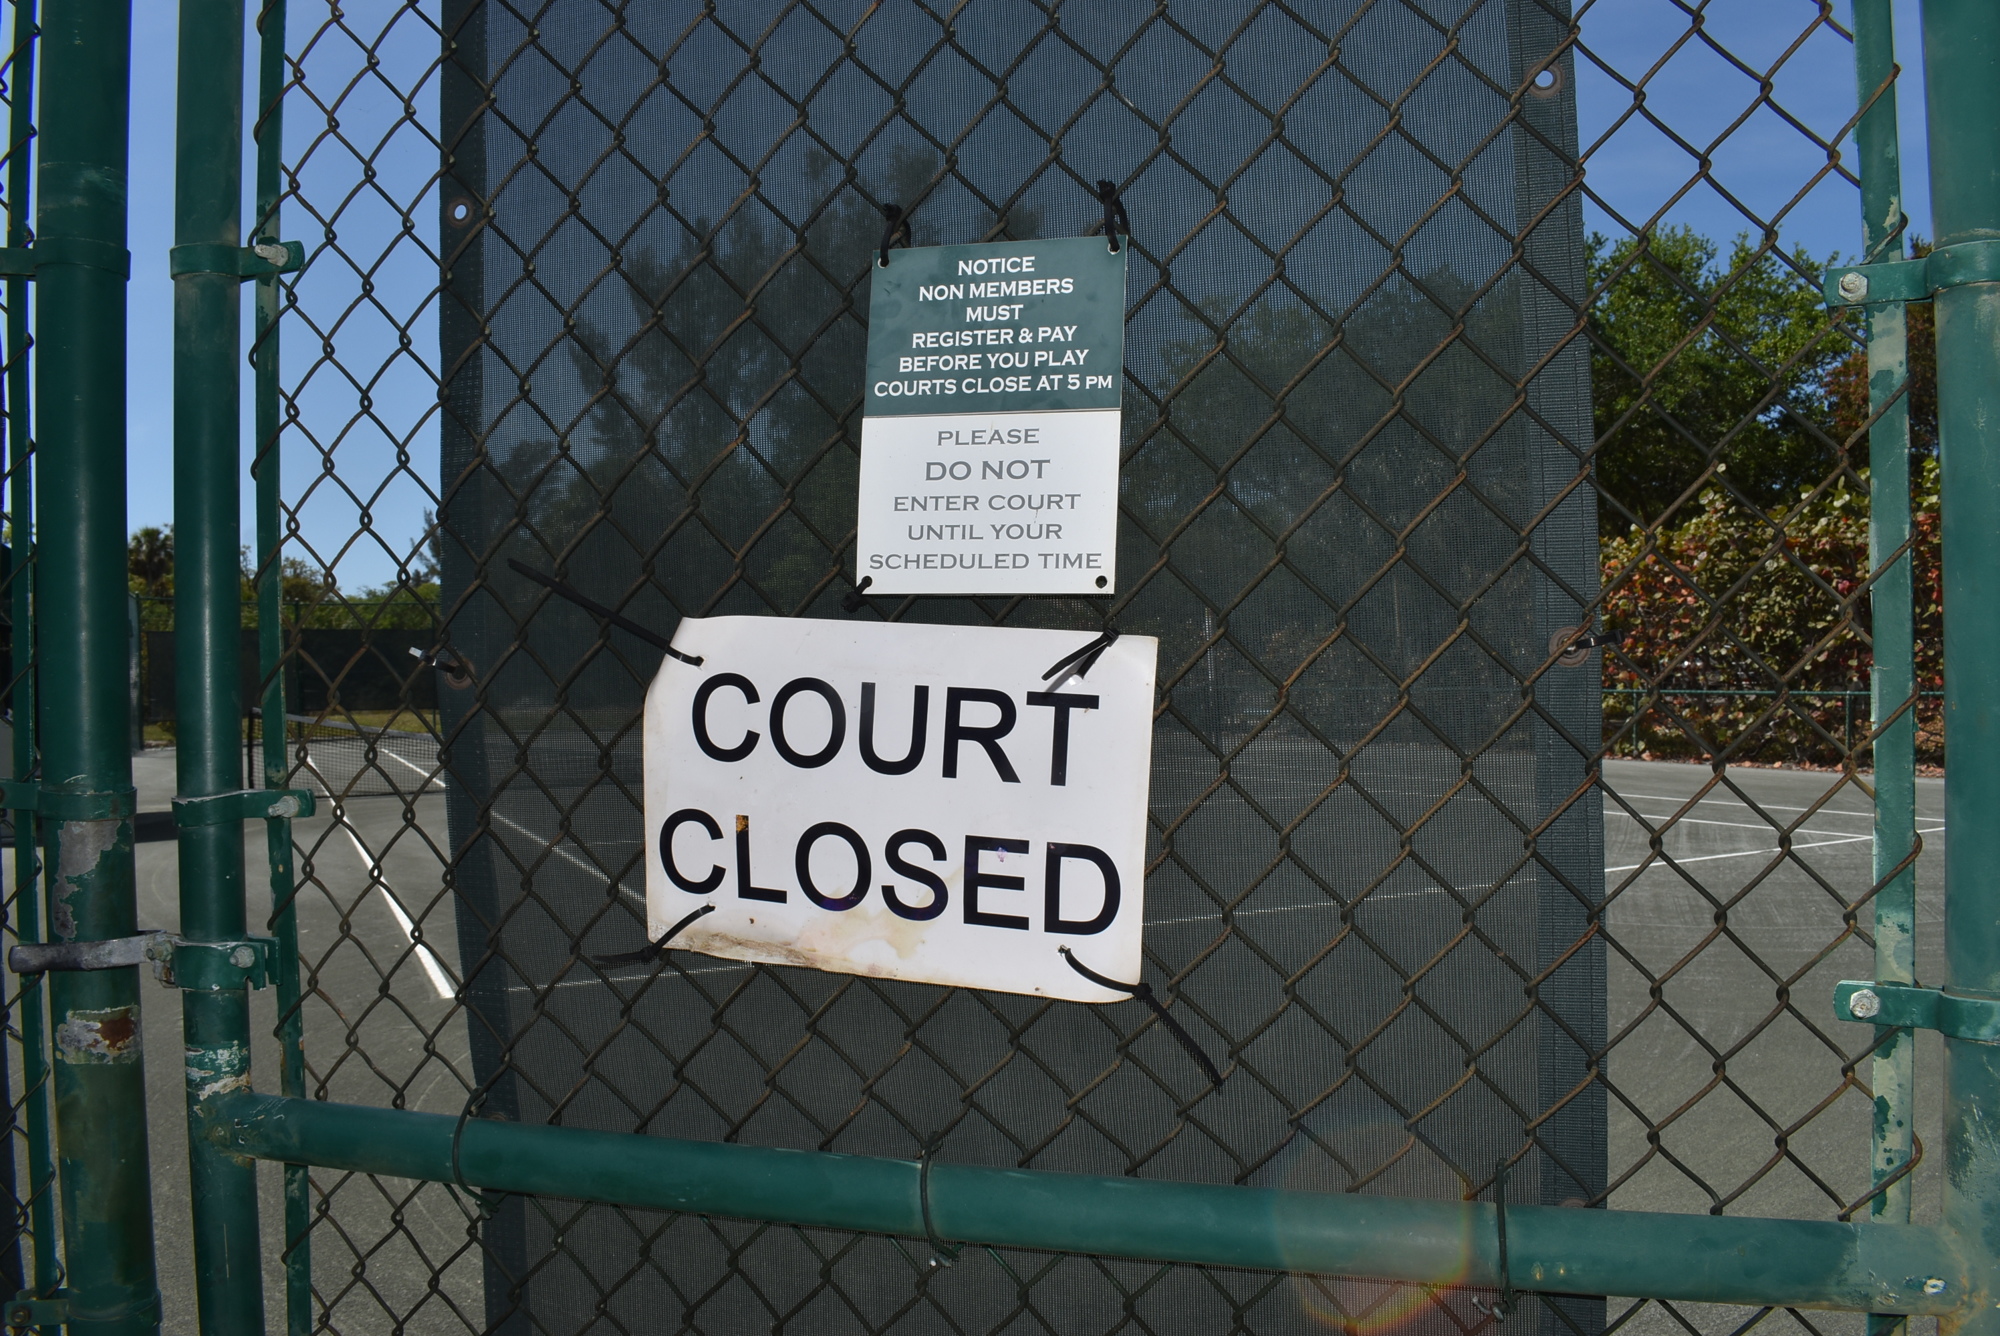 The Longboat Key Public Tennis Center closed on March 22.